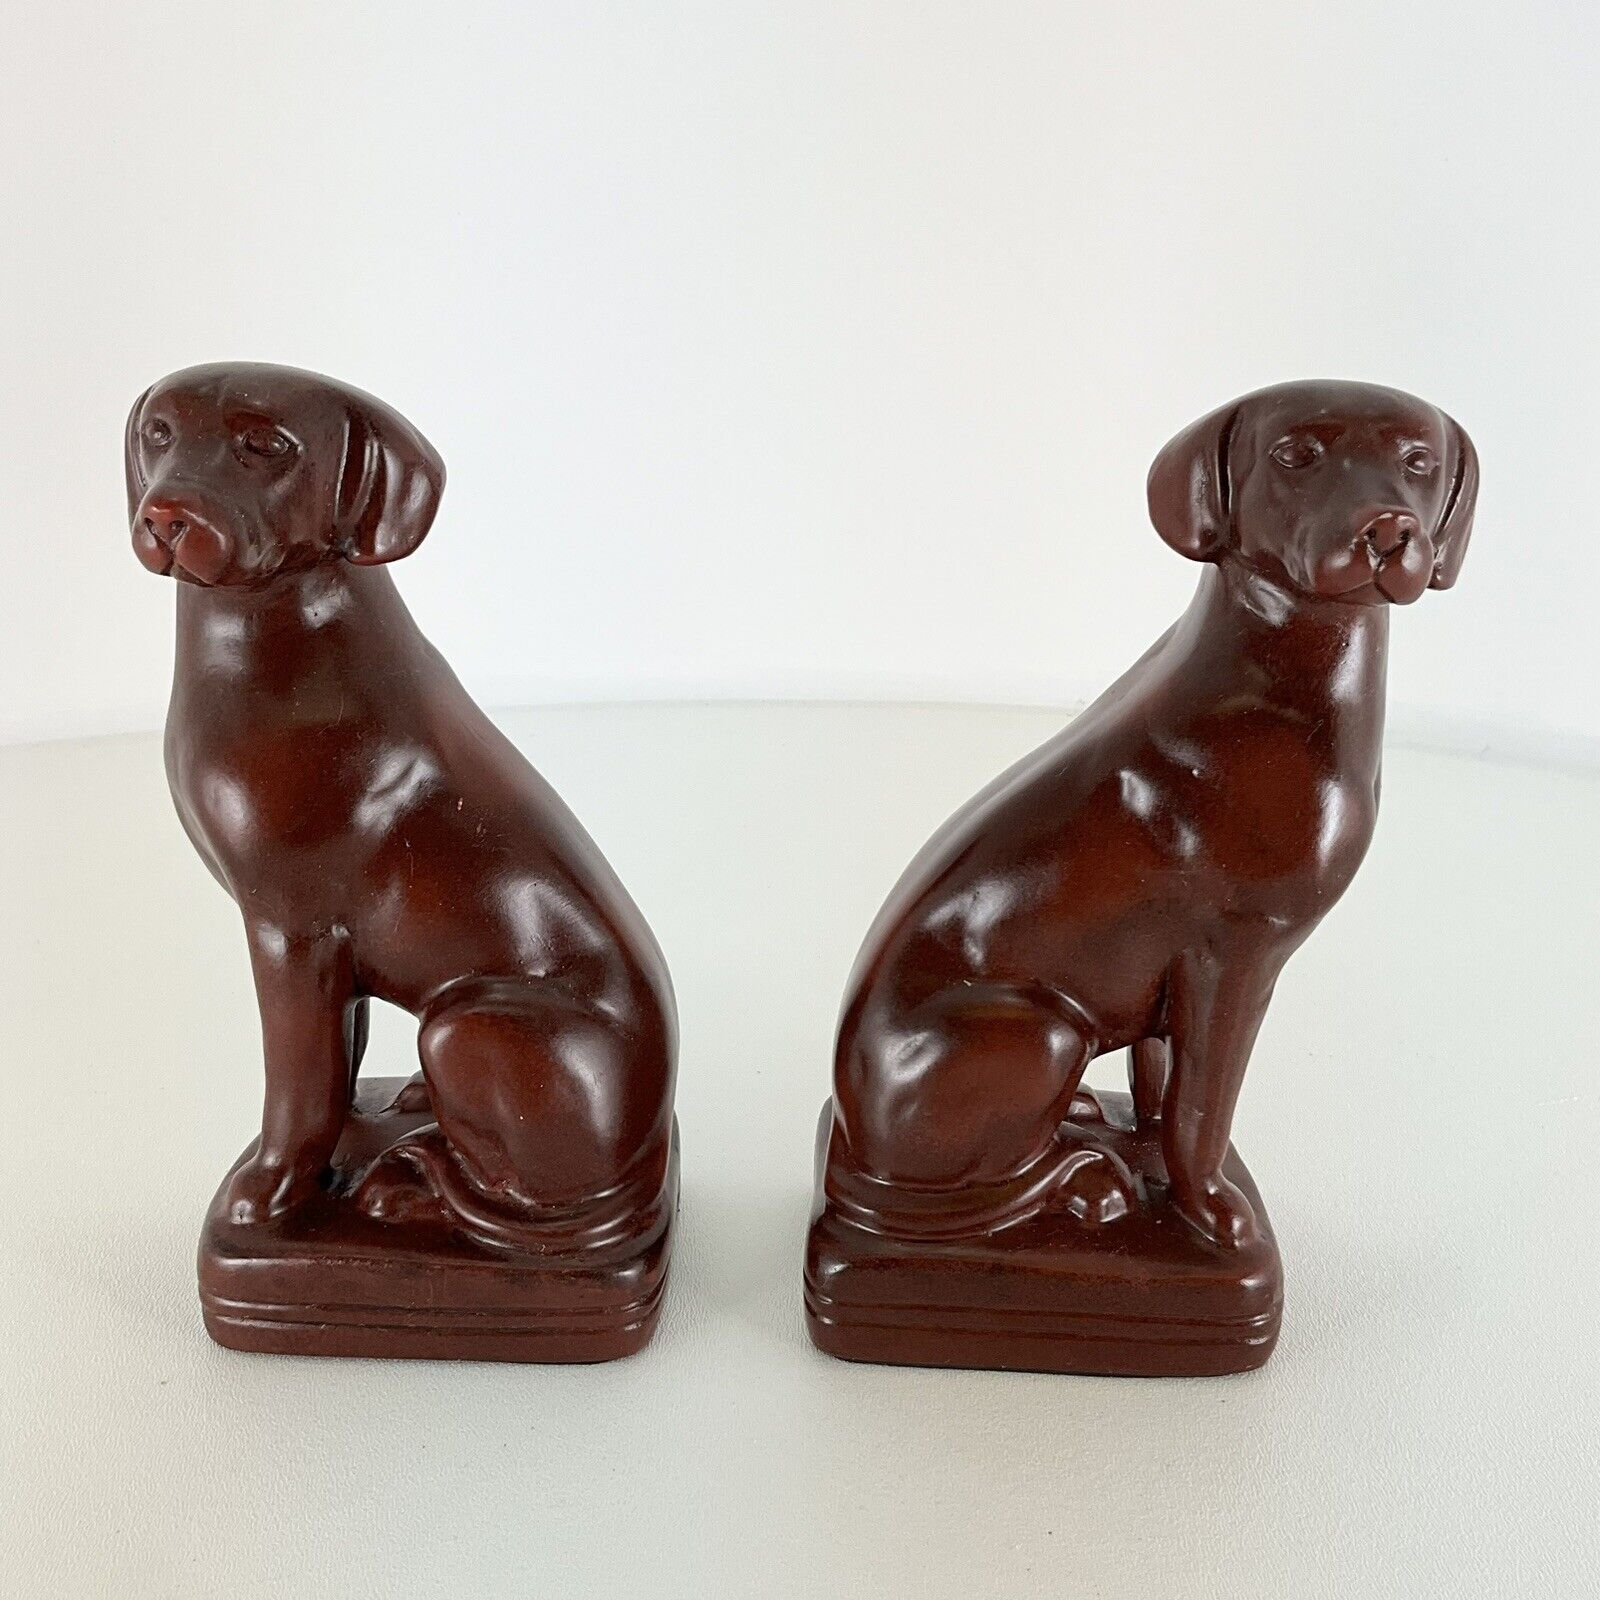 Pair Of Vintage Wooden Labrador Retriever Vizsla Bookends Great For Father’s Day